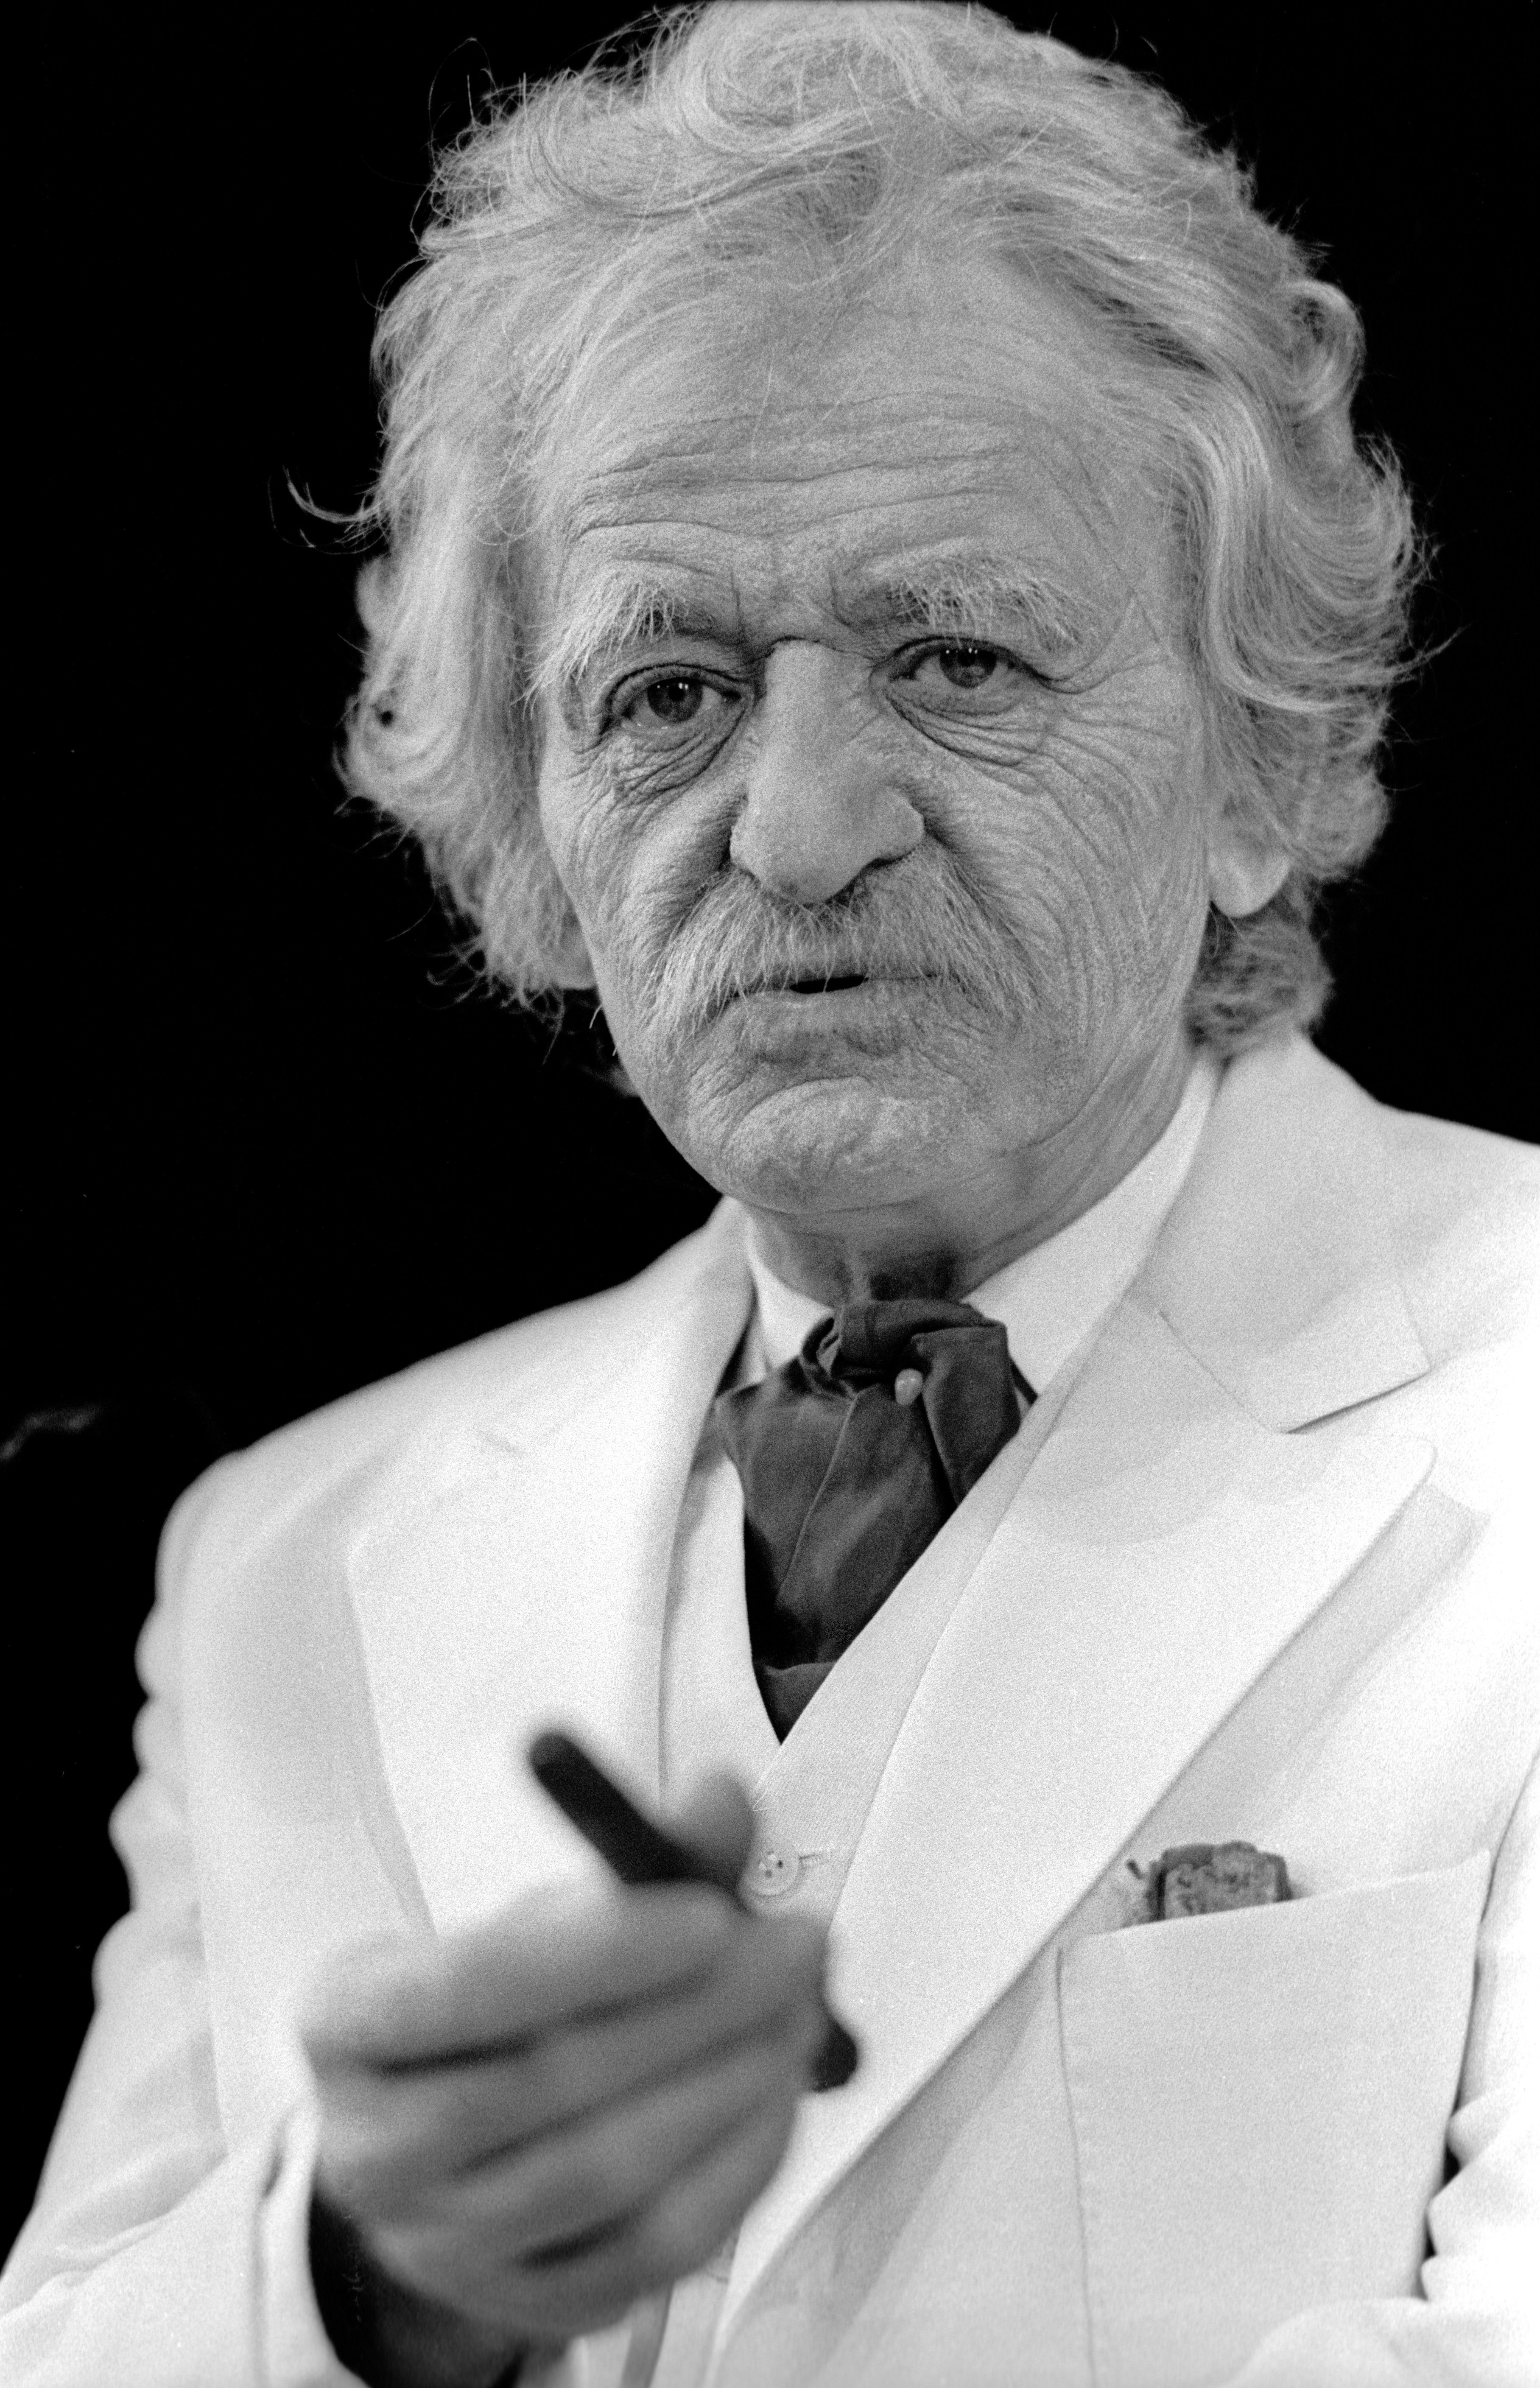 Hal Holbrook plays the role of American author, humorist and lecturer in his performance of "Mark Twain Tonight" at the University of Wyoming Arts & Sciences Auditorium on January 30, 1984 | Source: Getty Images